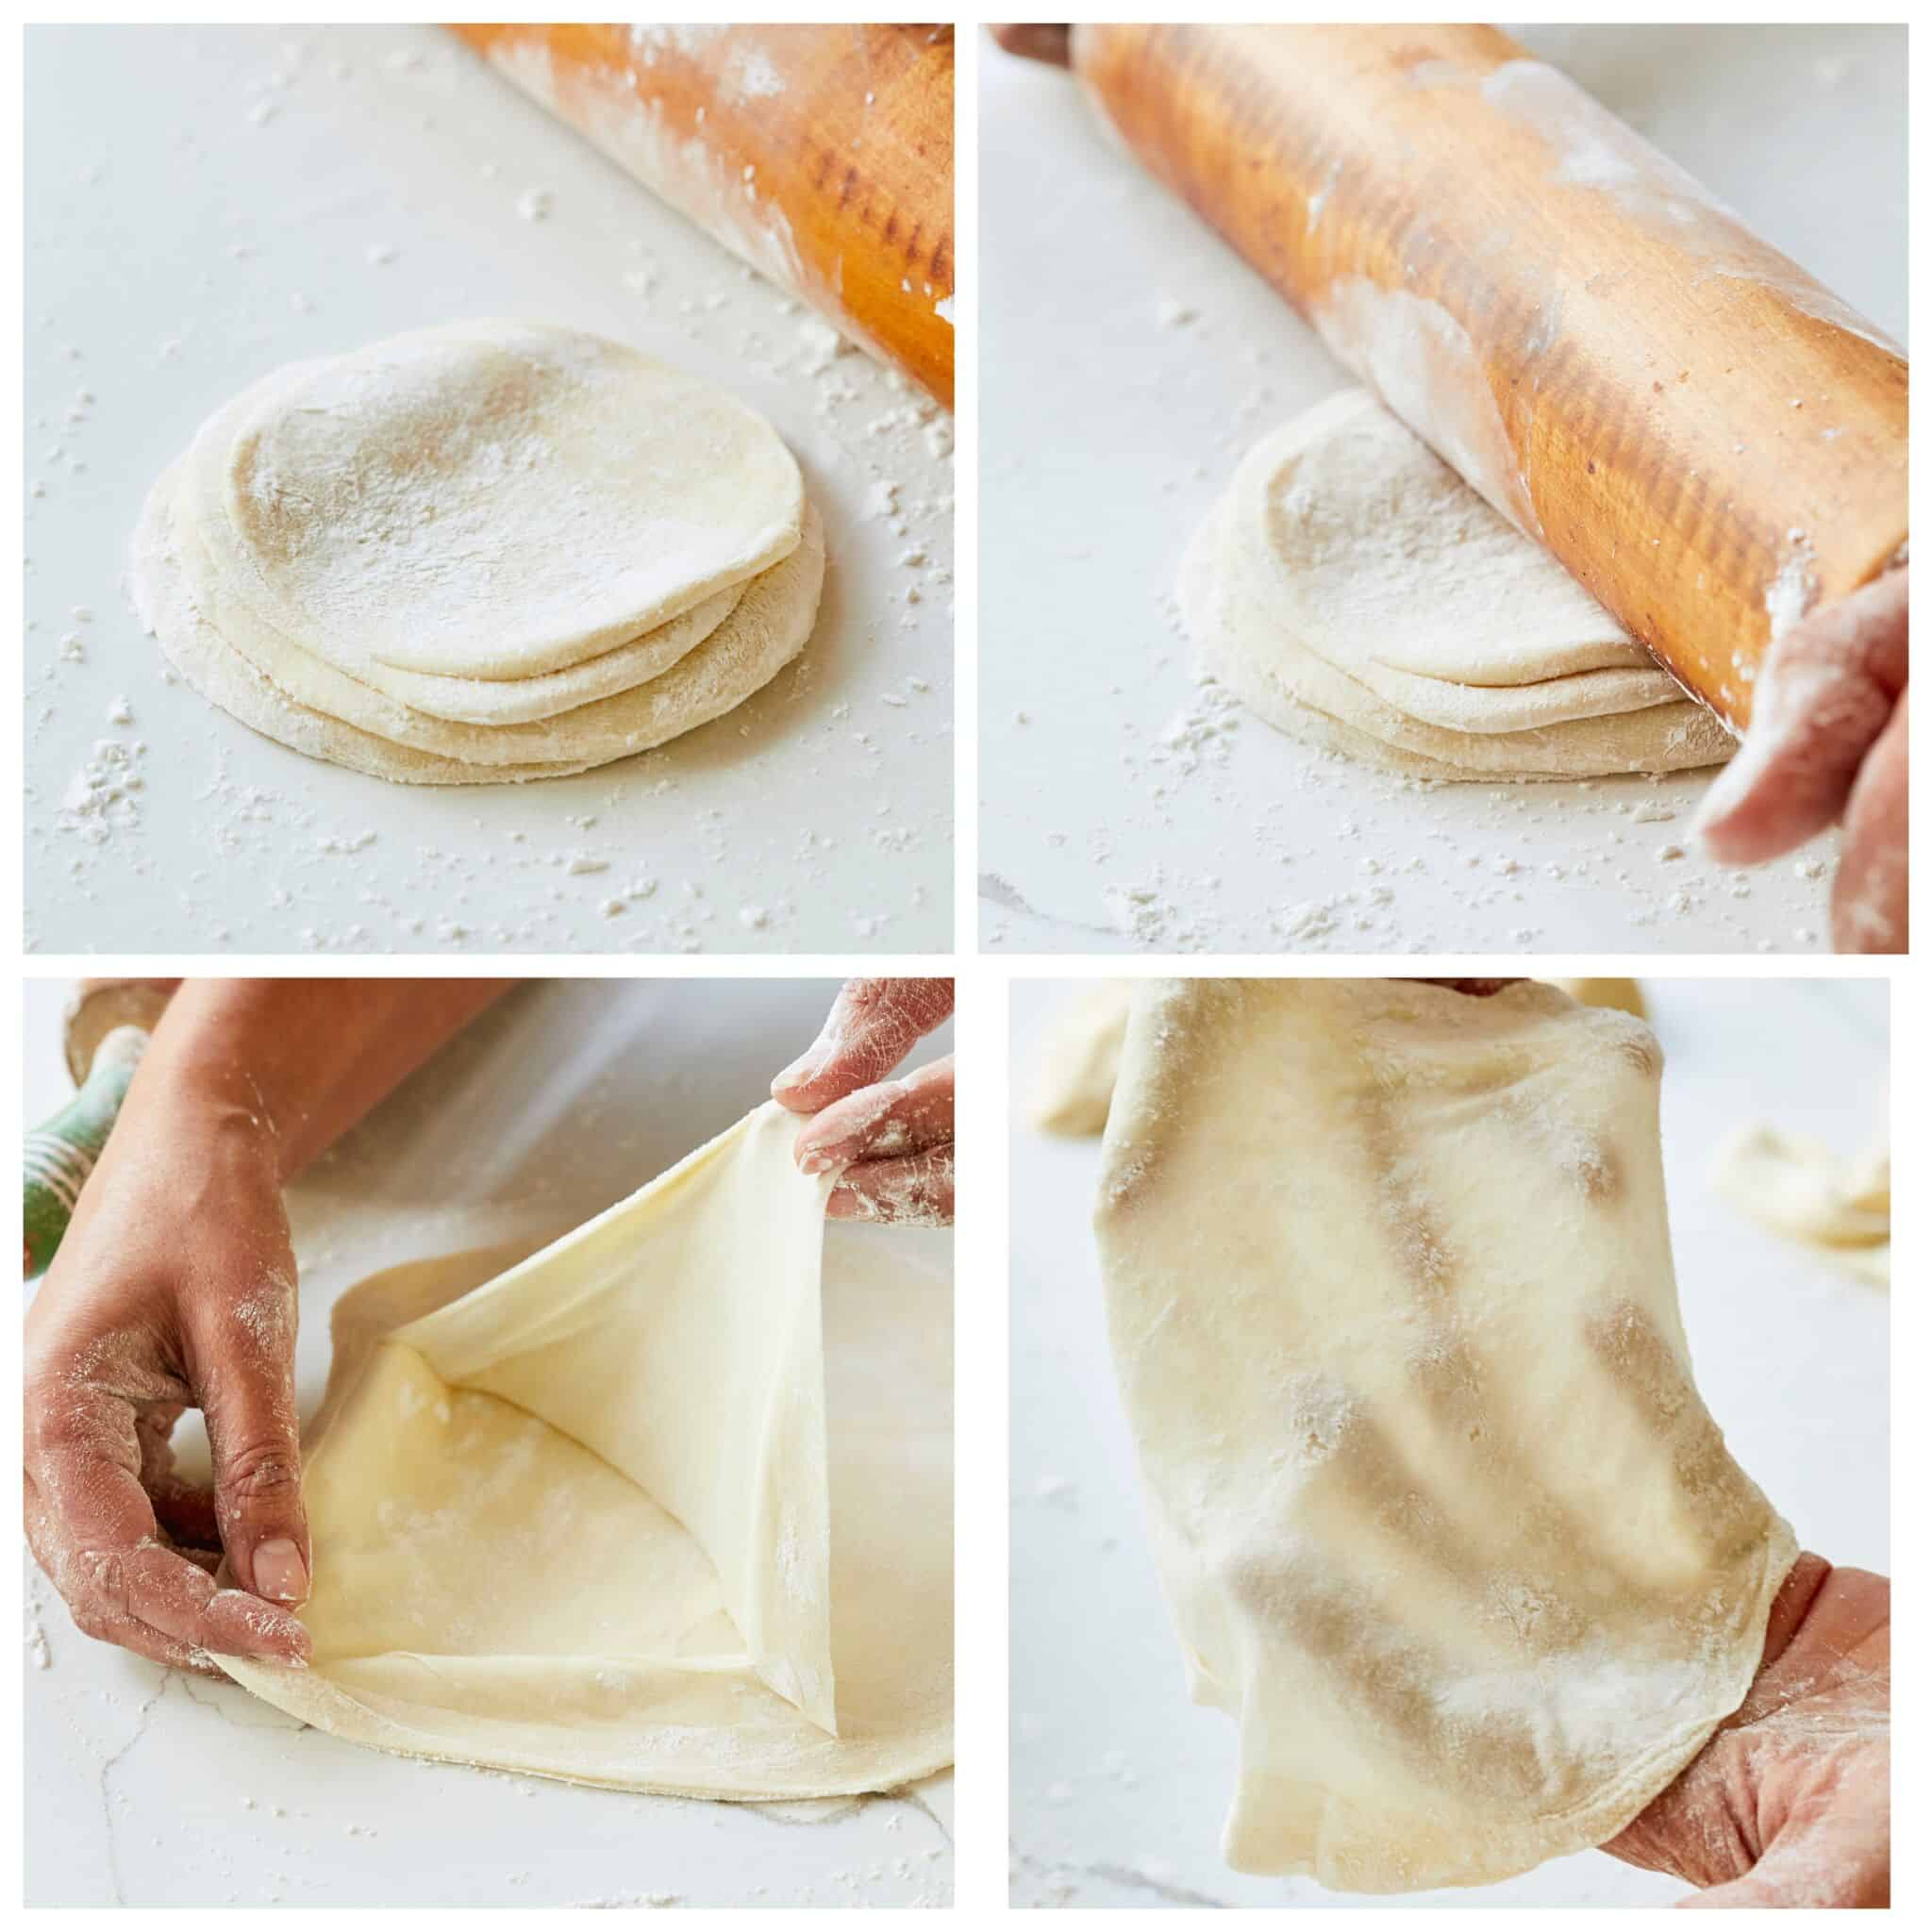 Step-by-step instructions on how to make Phyllo Dough (Fill Pastry): Roll the stack of dough from 5 balls out to a circle about 8 inches (20 cm). Separate the layers, add more flour in between, restack and then roll out to a 10-12 inch circle (25-30 cm). The dough layers should be paper-thin and translucent. Carefully pull apart the layers, dust a touch more flour in between, restack and place the dough stack between two pieces of parchment paper and roll up.